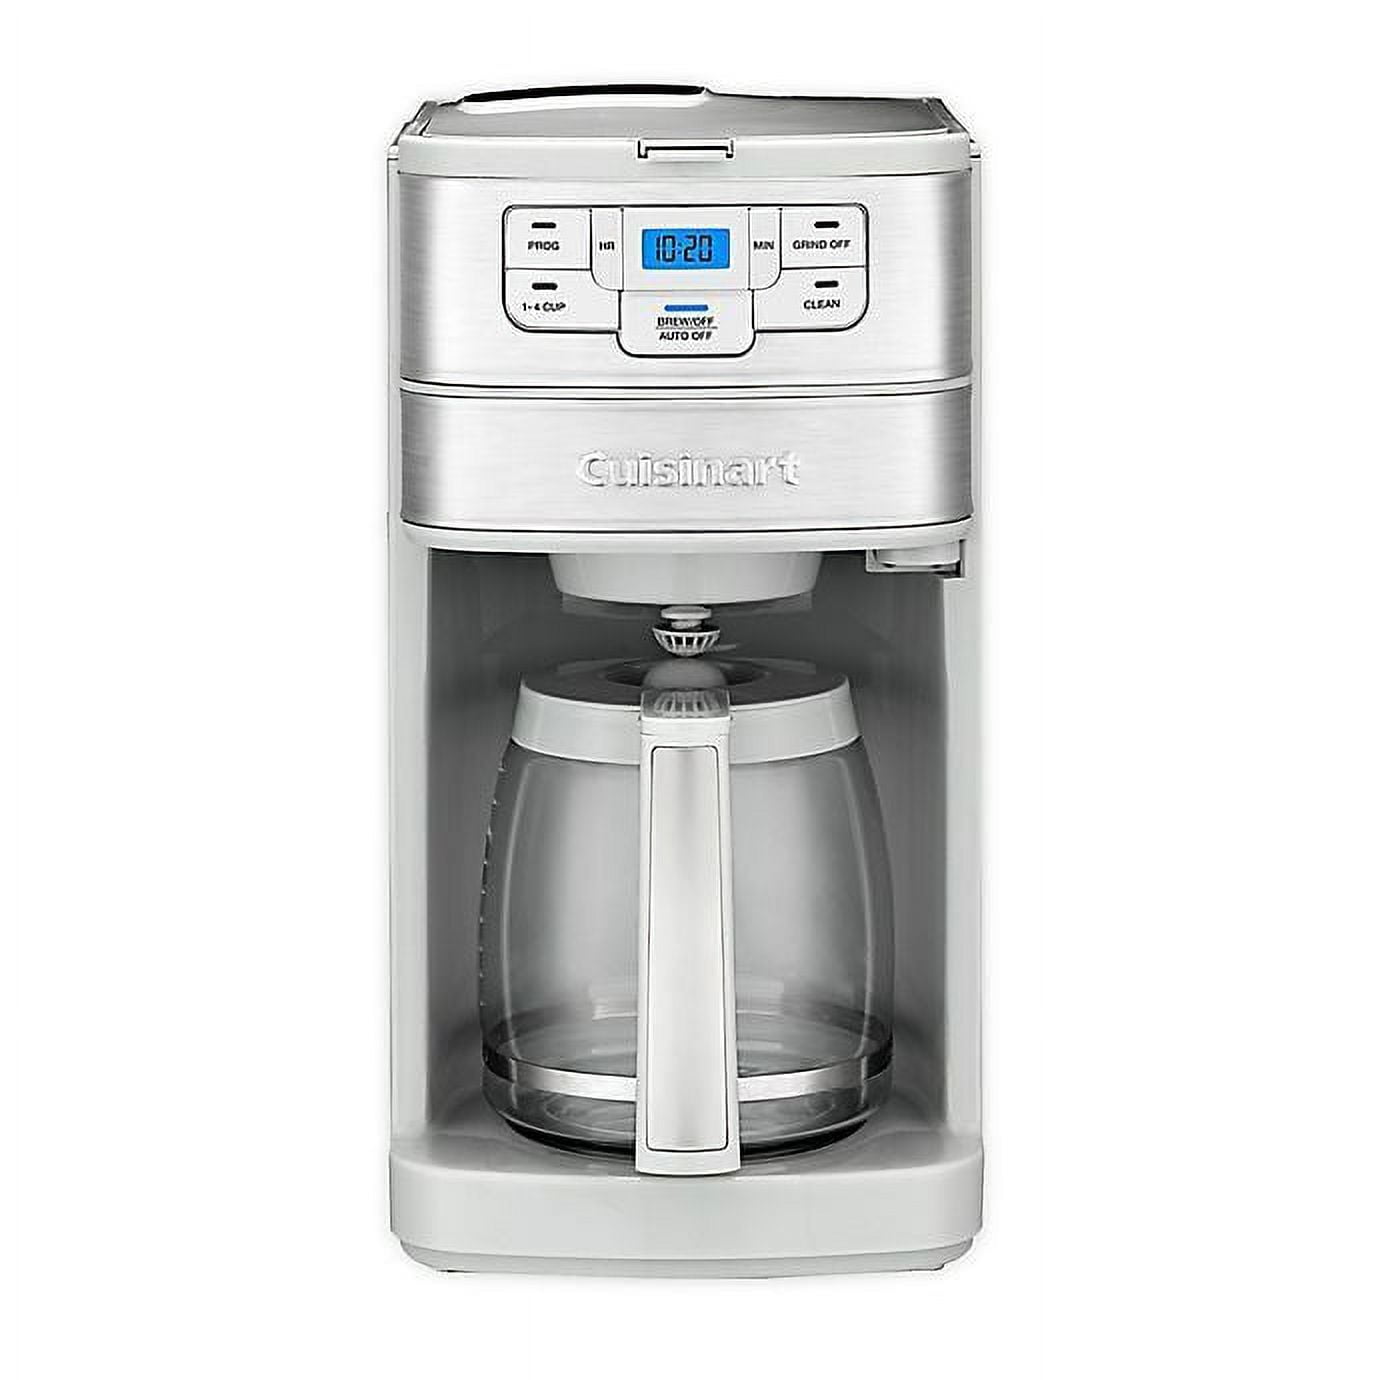 Cuisinart Automatic Grind & Brew 12-Cup Coffee Maker Machine + Reviews